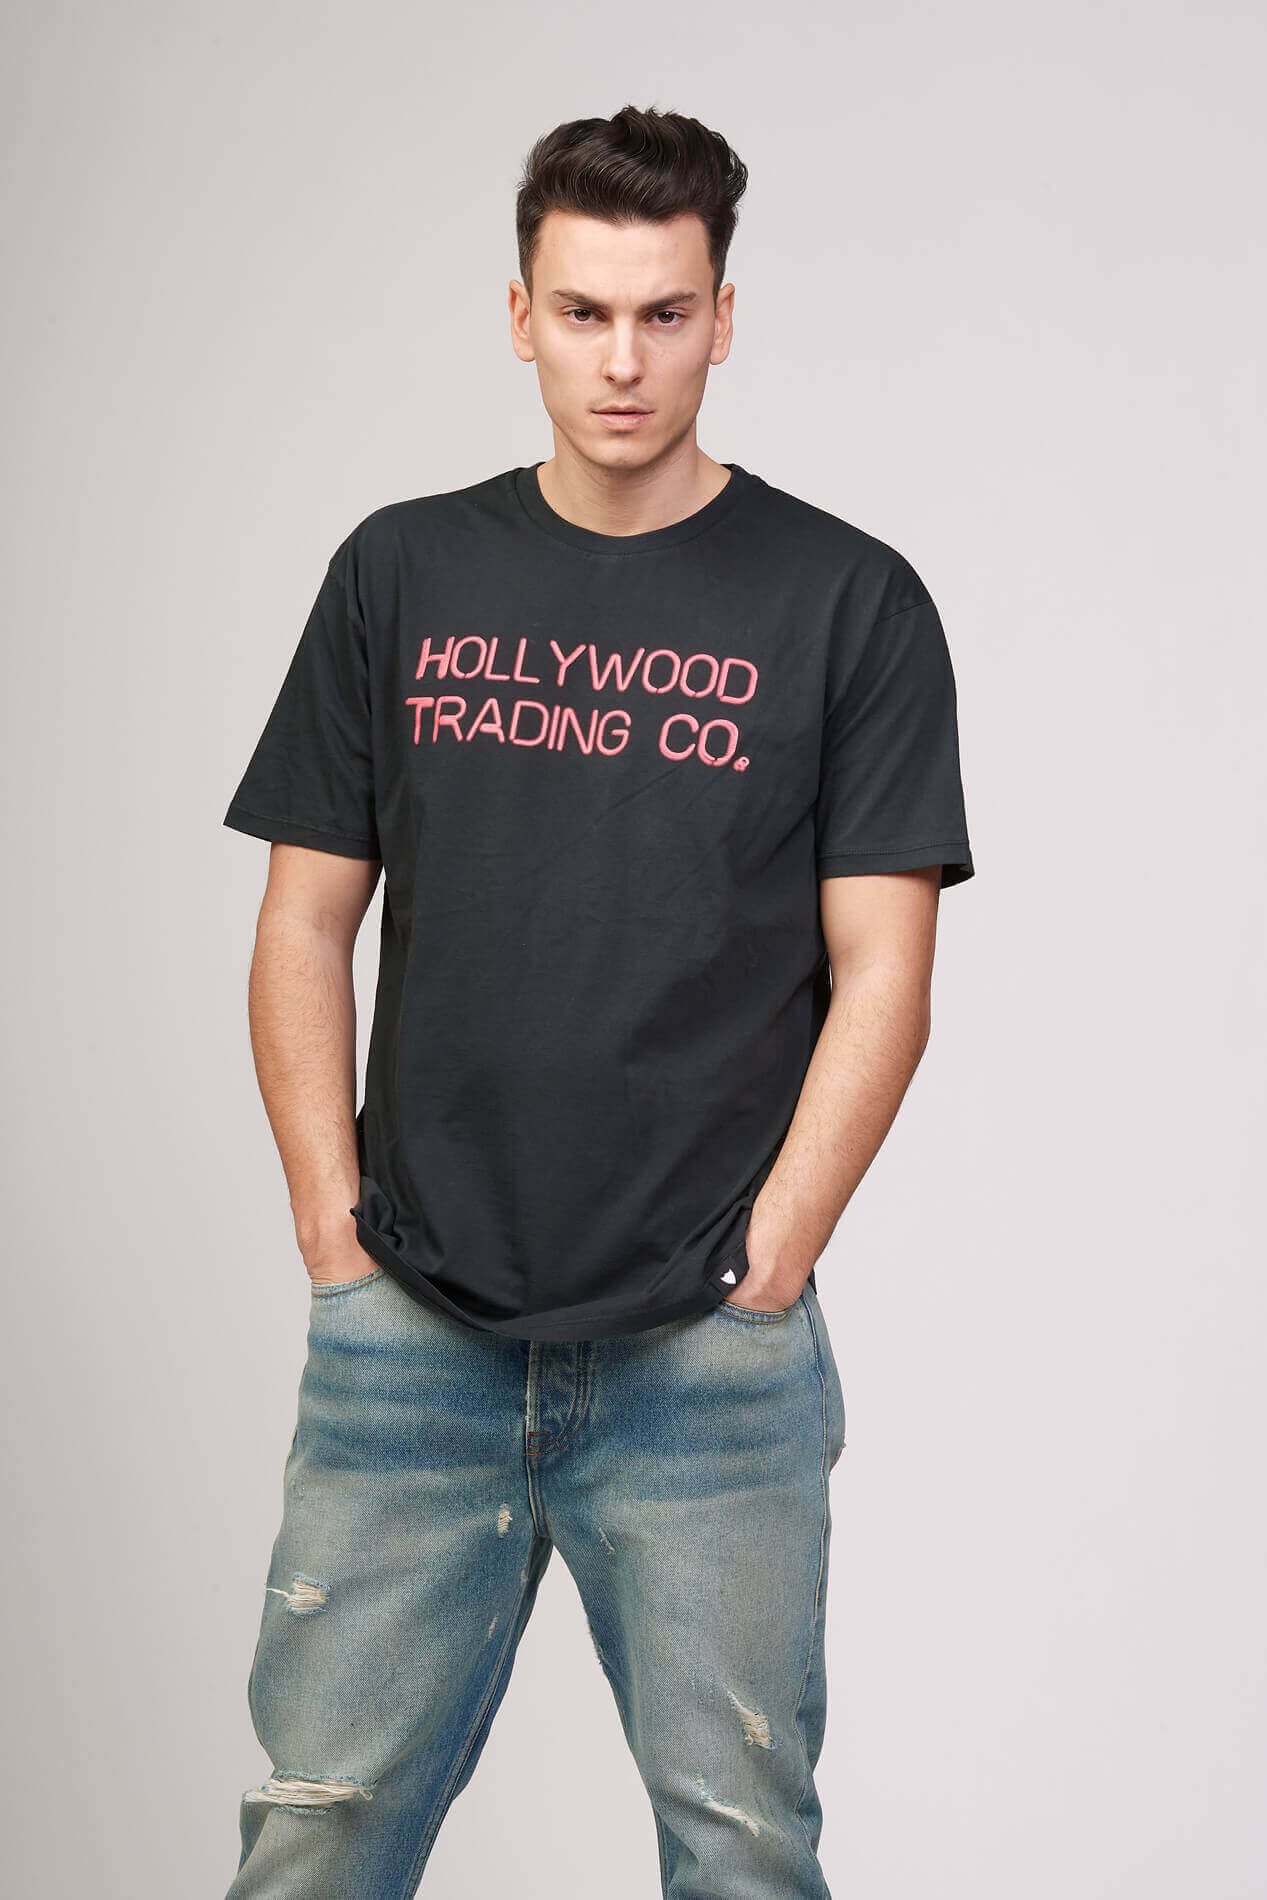 HOLLYWOOD TRADING CO. T-SHIRT Regular fit t-shirt with 'Hollywood Trading Co.' printed on the front. 100% cotton. Made in Italy. HTC LOS ANGELES